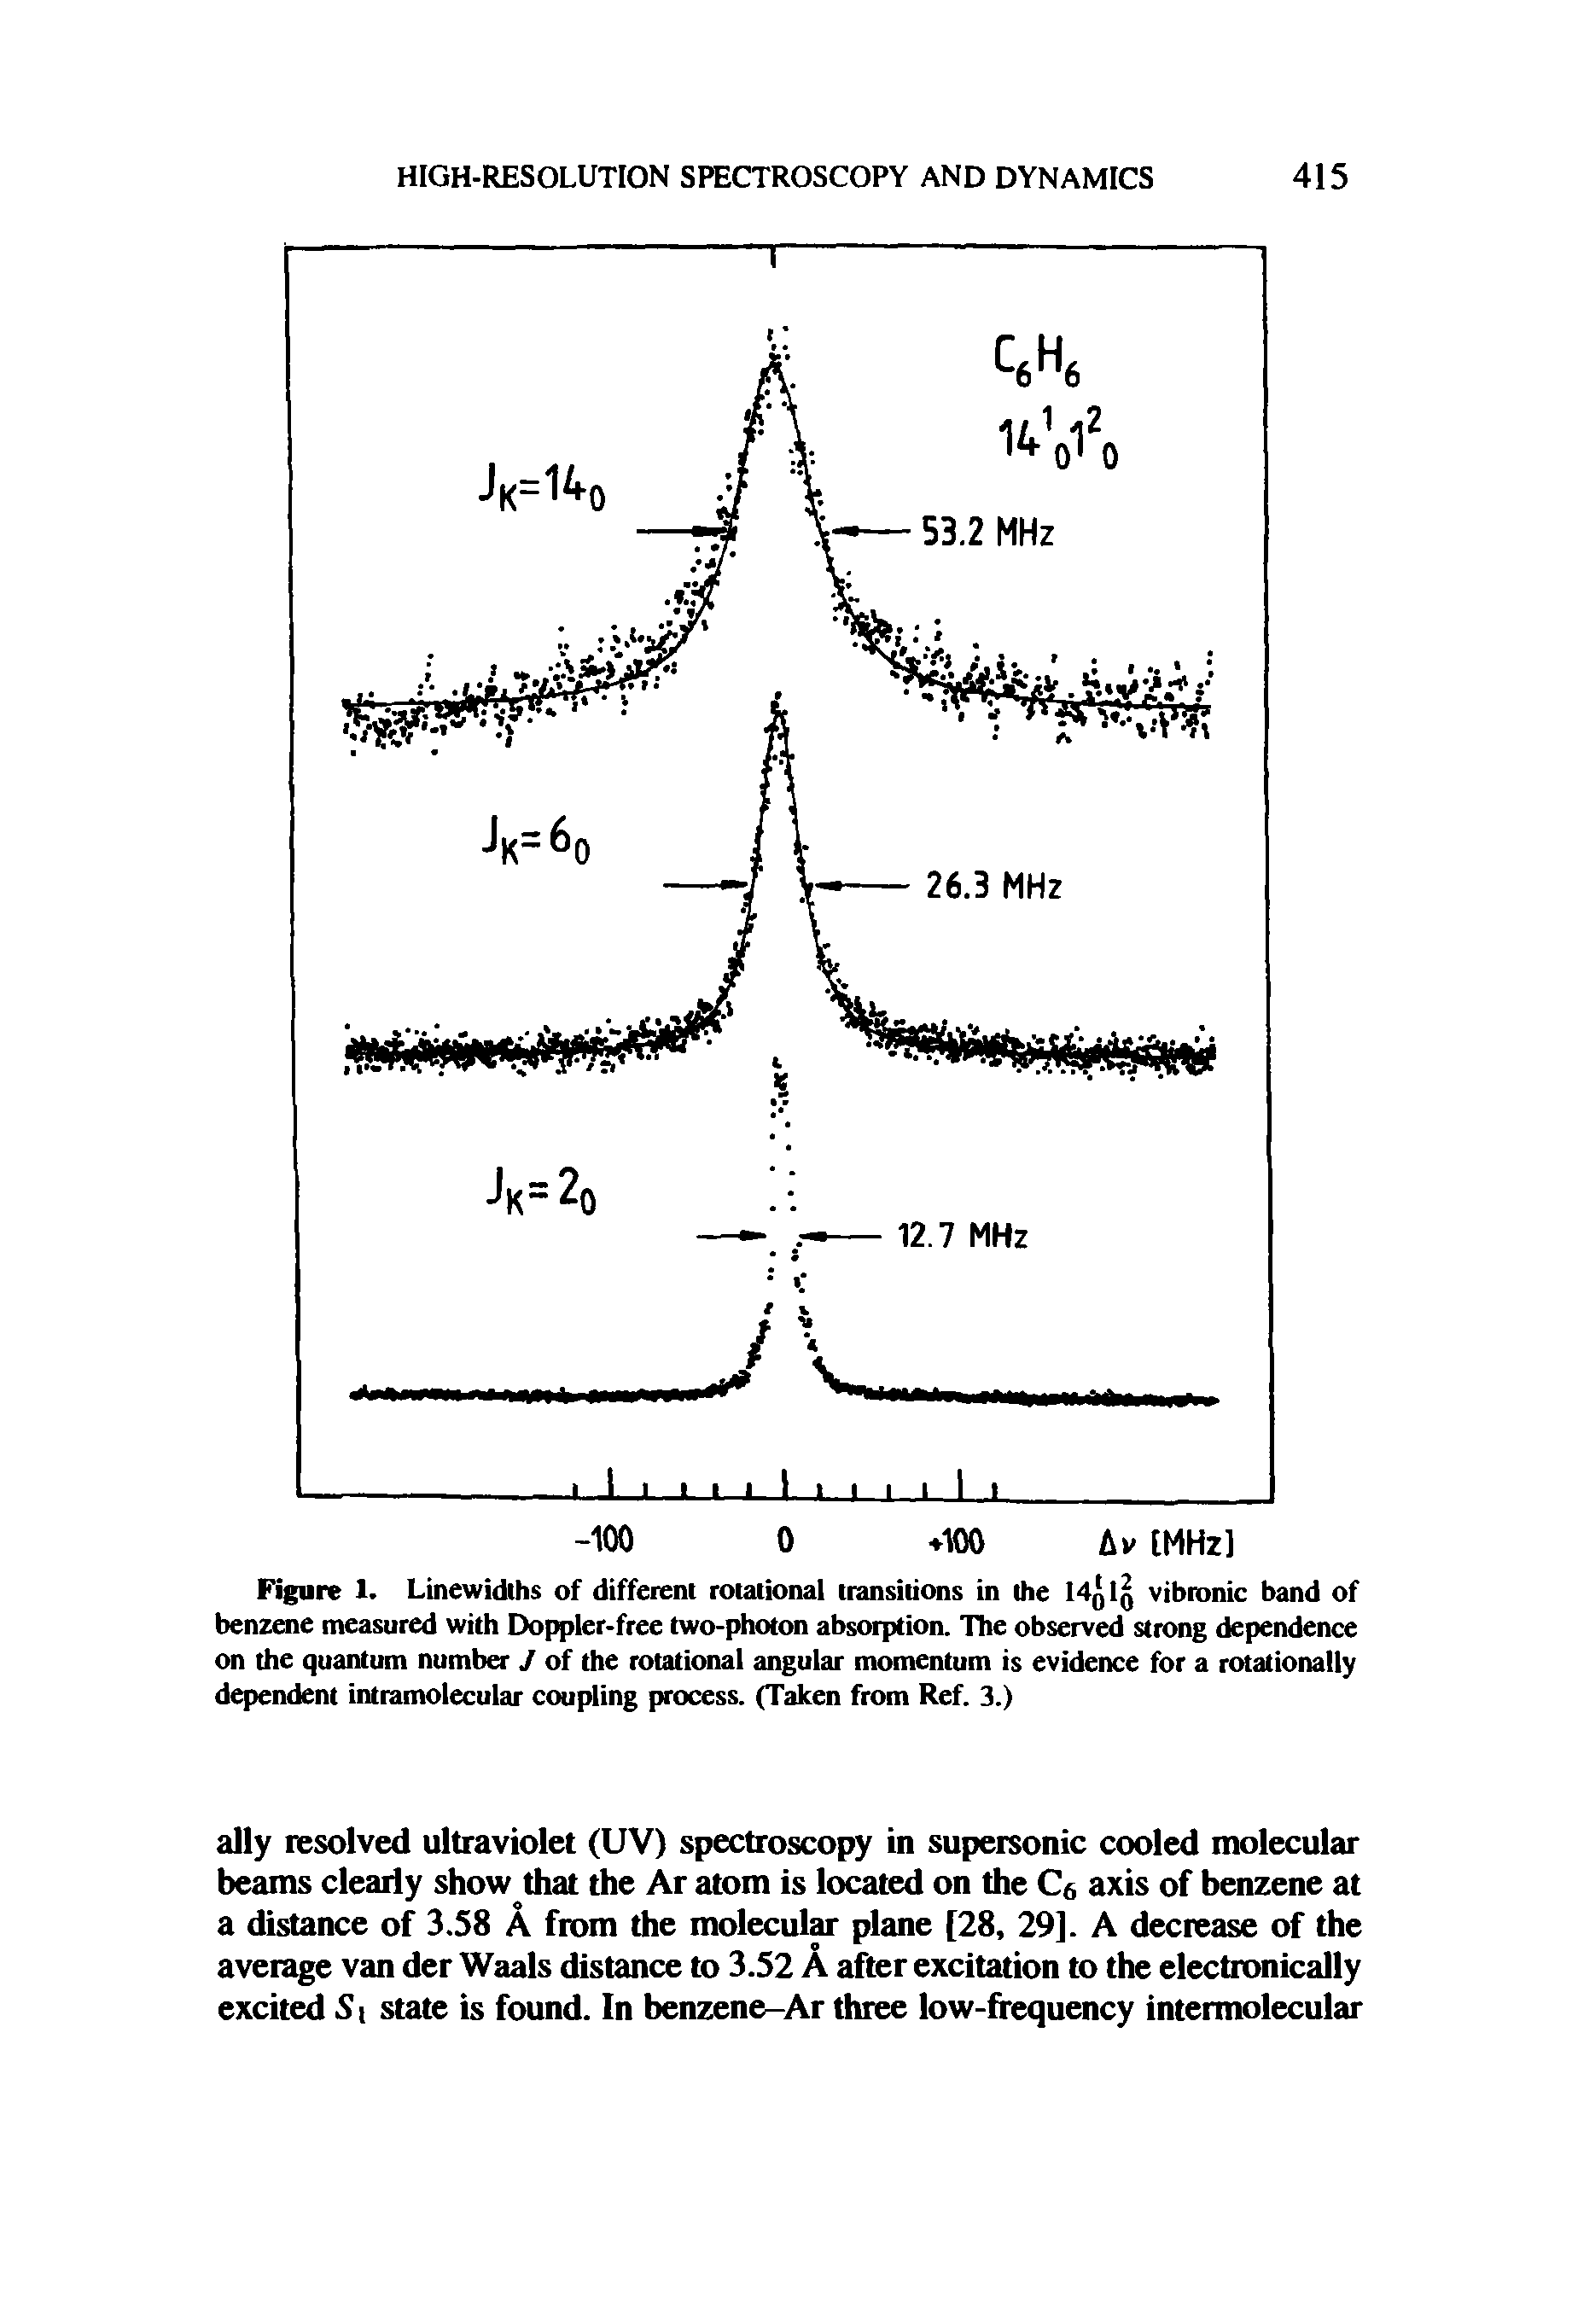 Figure 1. Linewidlhs of different rotational transitions in the 14q1q vibronic band of benzene measured with Doppler-free two-photon absorption. The observed strong dependence on the quantum number J of the rotational angular momentum is evidence for a rotationally dependent intramolecular coupling process. (Taken from Ref. 3.)...